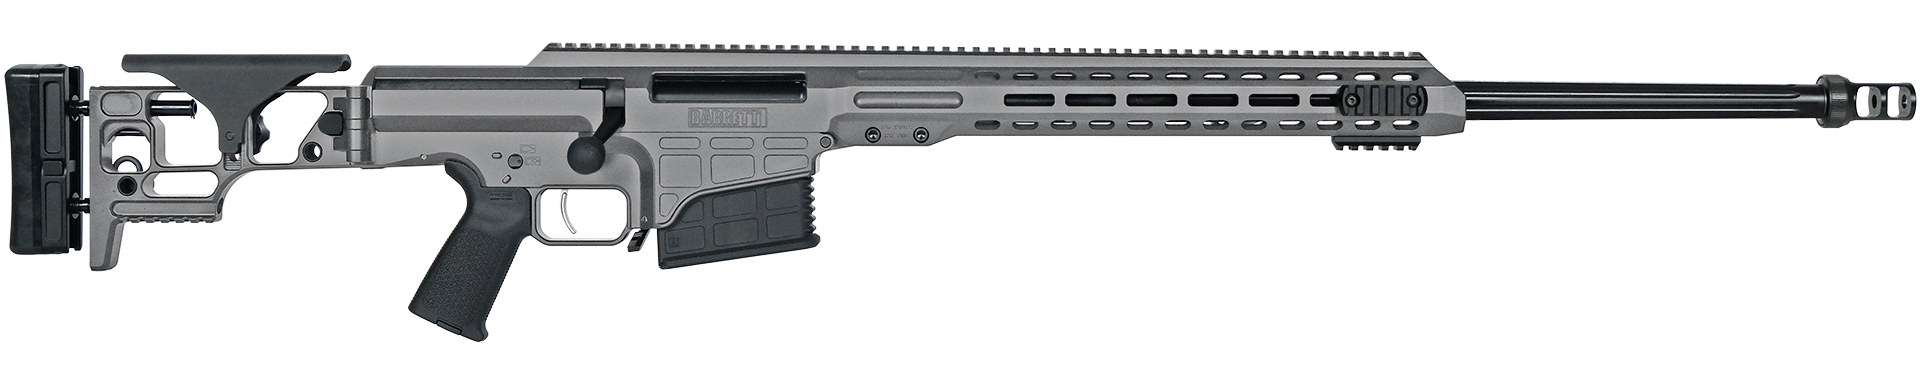 MRAD-TG-Product-Page.png